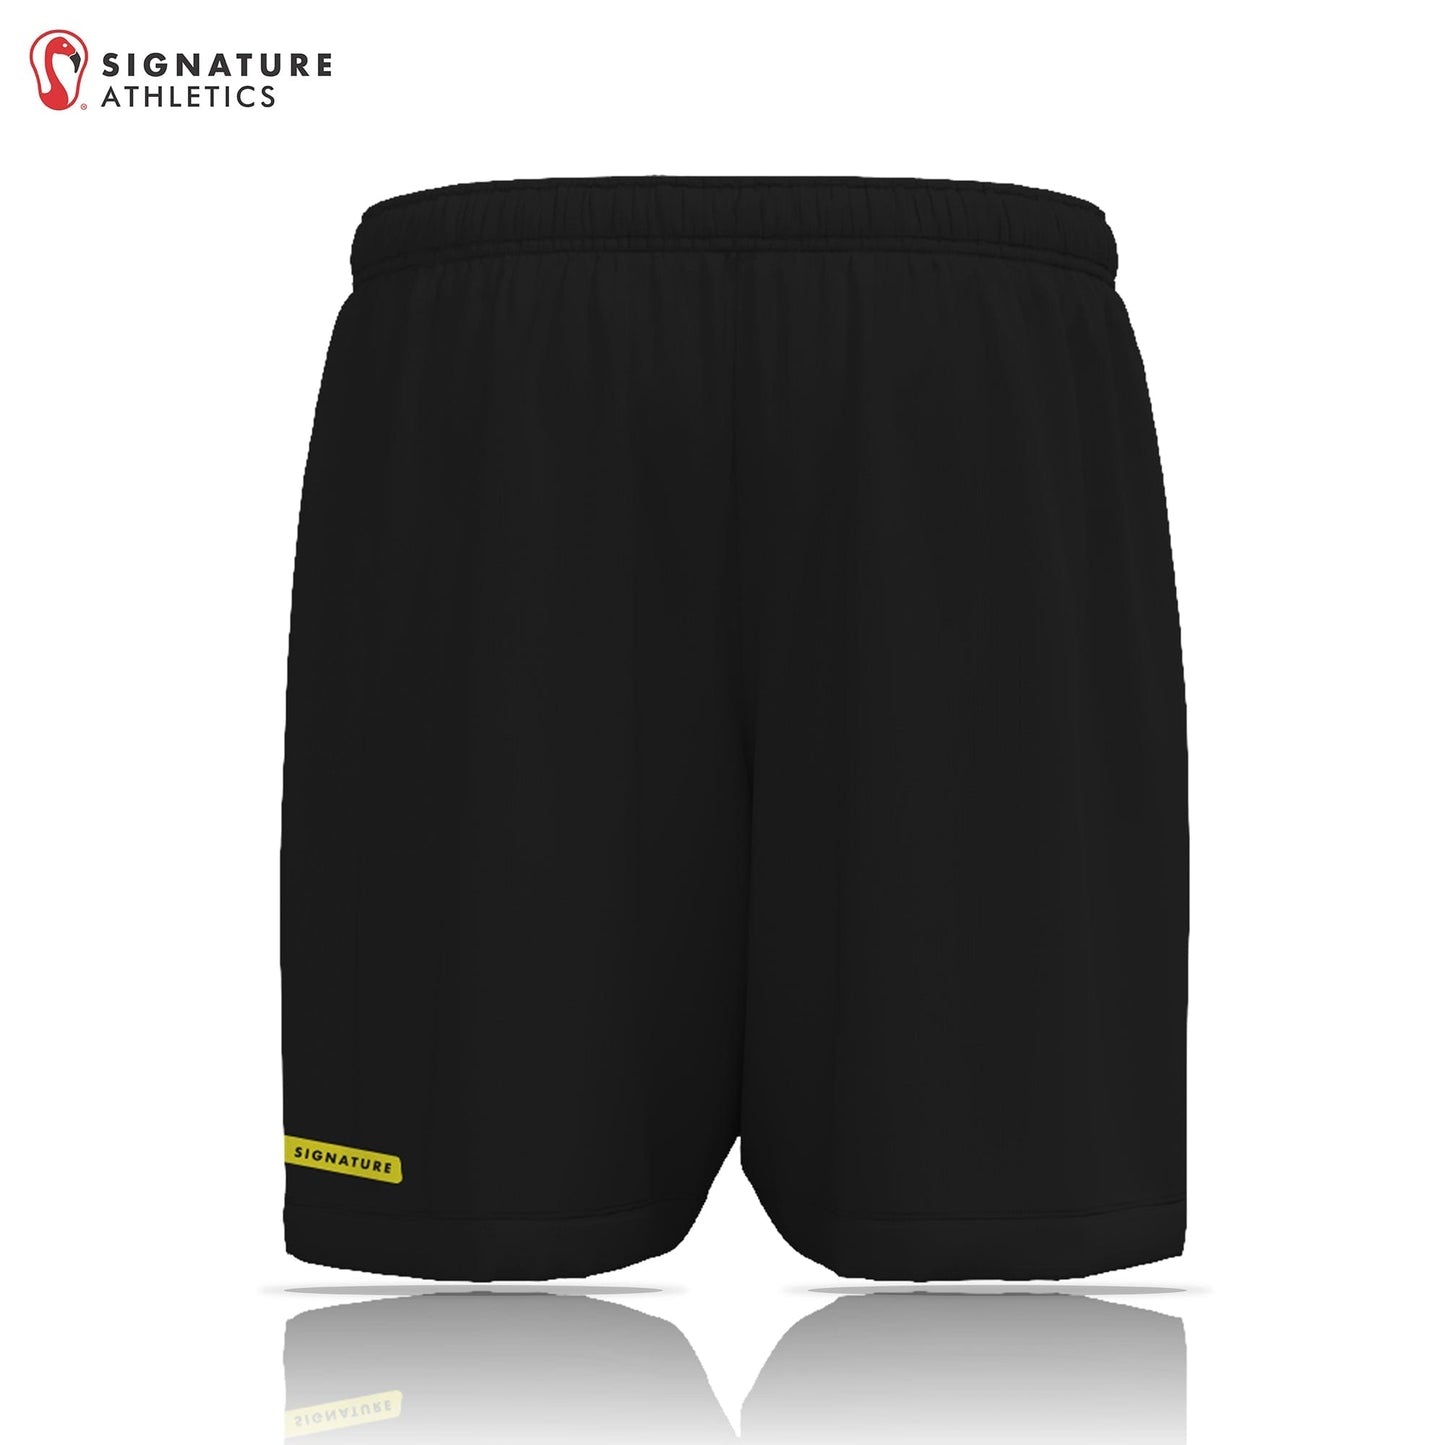 Wasatch Lacrosse Men's Player Game Shorts Signature Lacrosse